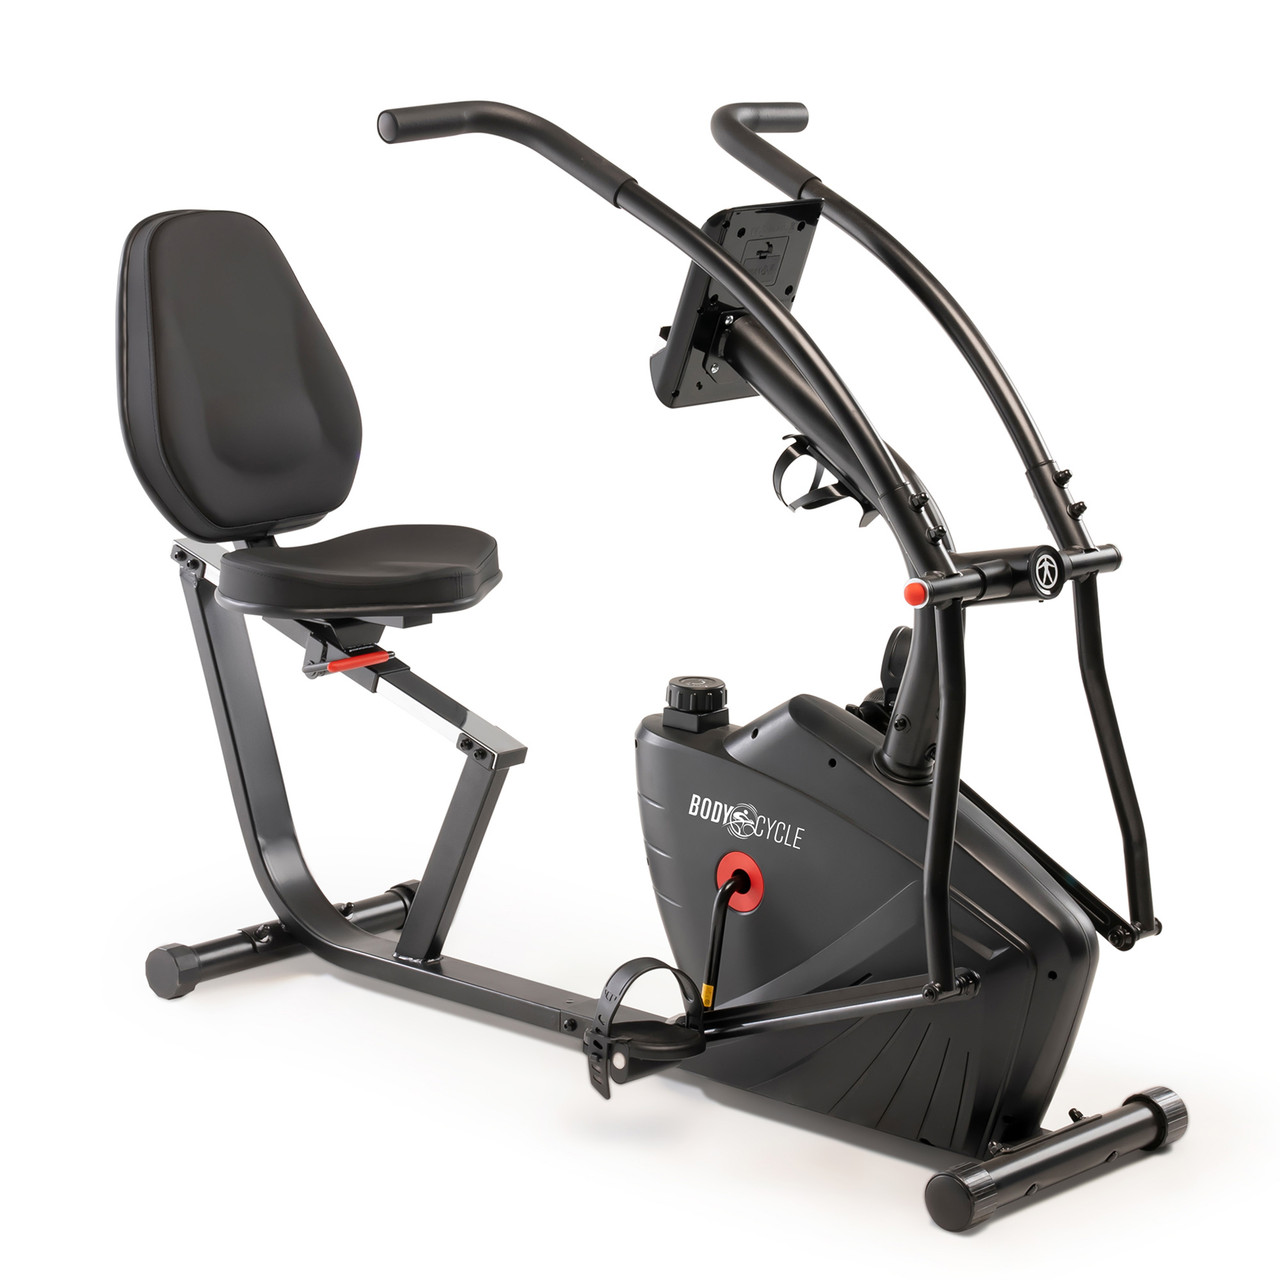 Body Cycle Recumbent JX-7301 Provides a Cardio Workout